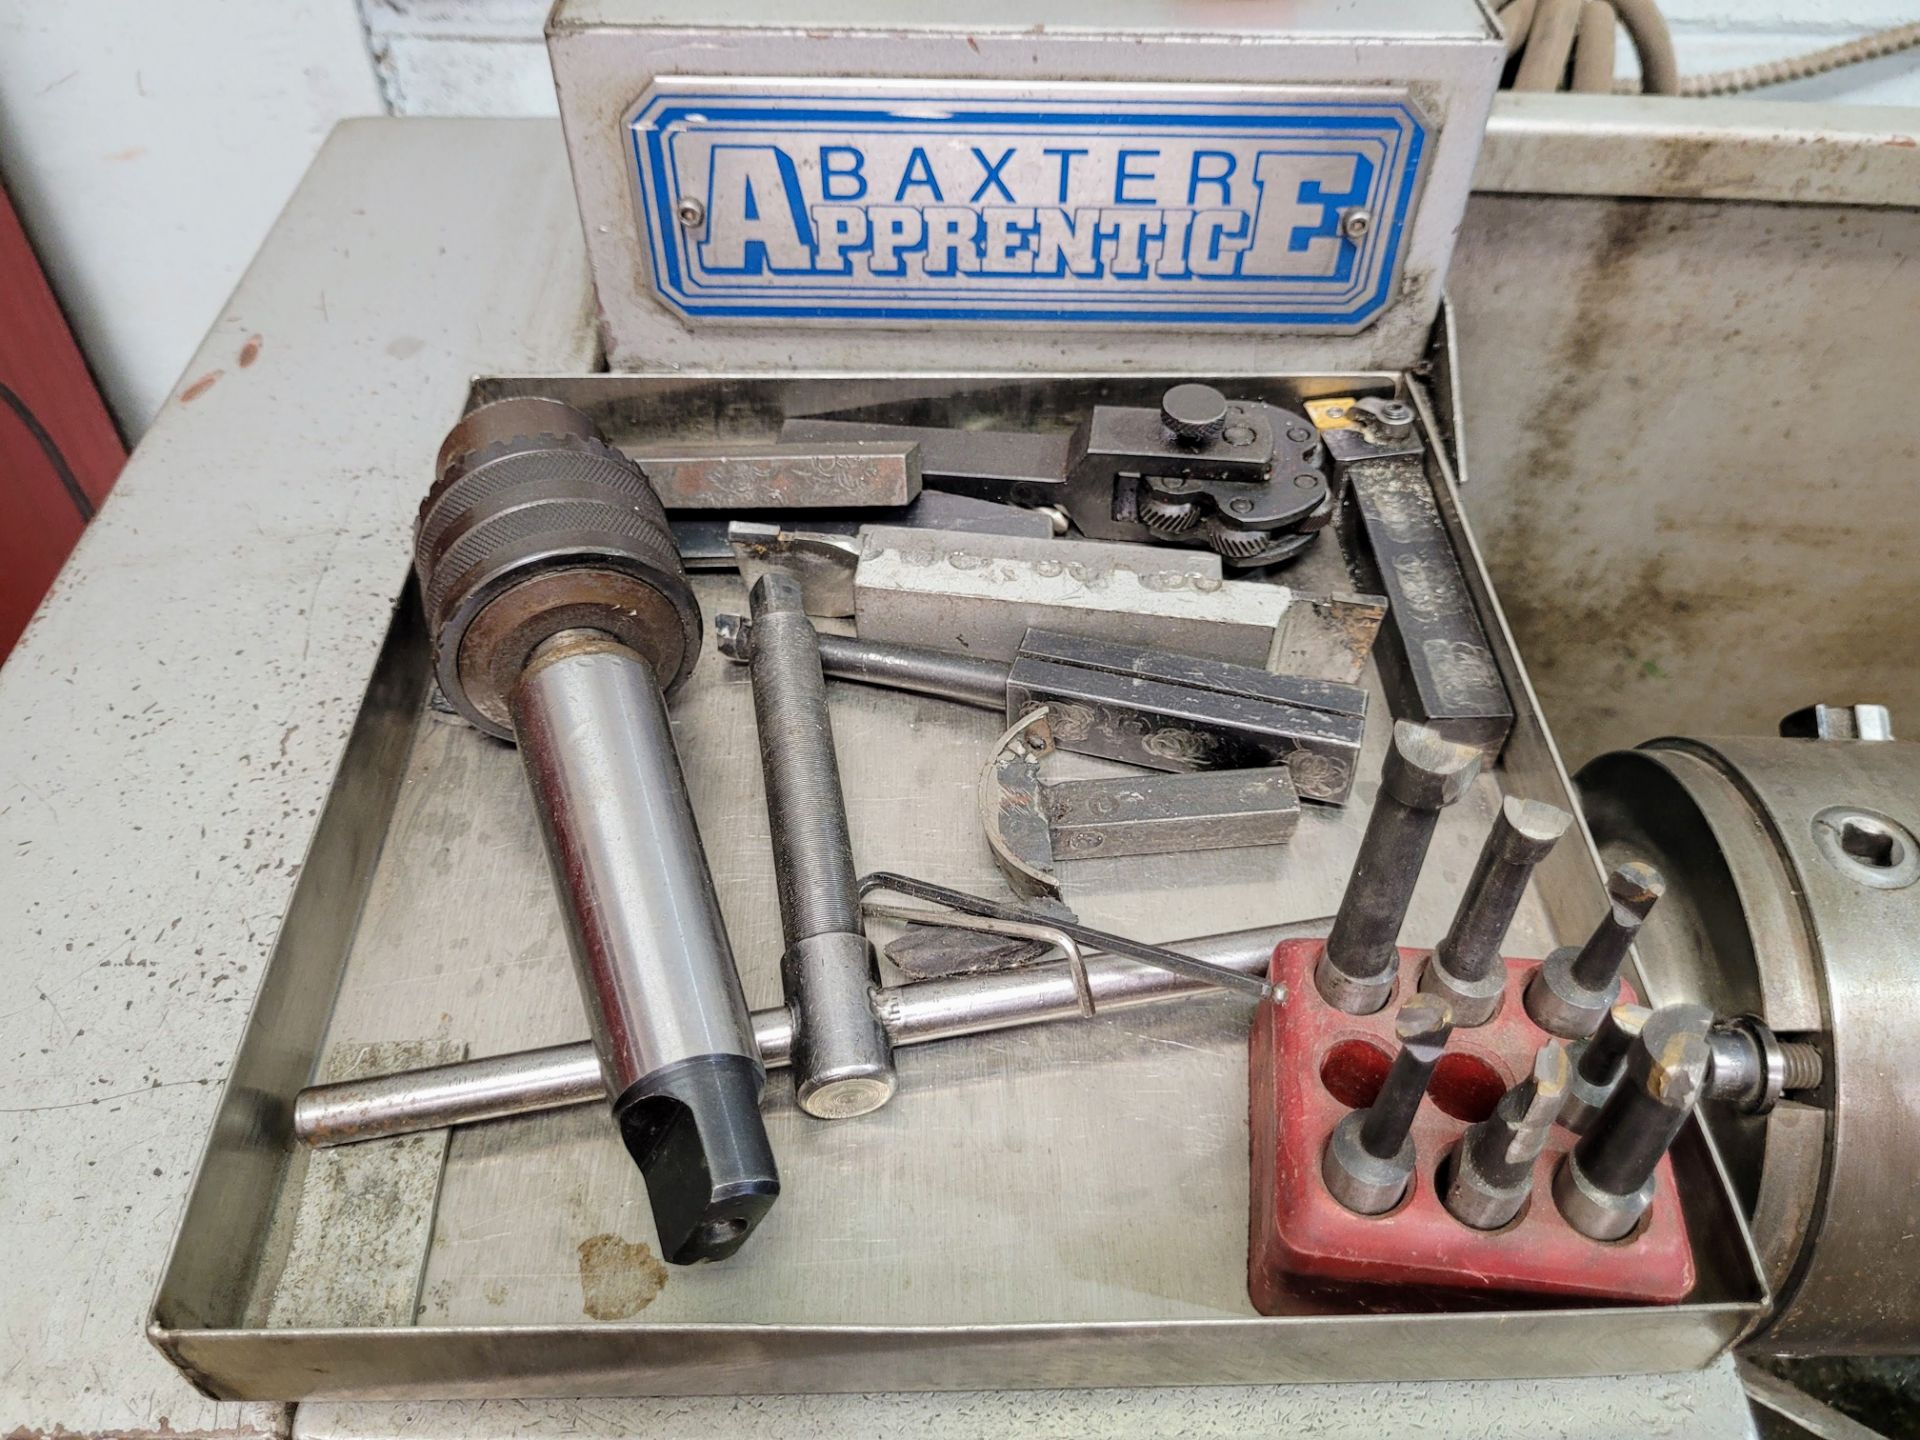 BAXTER APPRENTICE LATHE, 14" X 40", 6" 3-JAW CHUCK, TOOL POST, TAILSTOCK, TOOLING, ETC. - Image 7 of 7